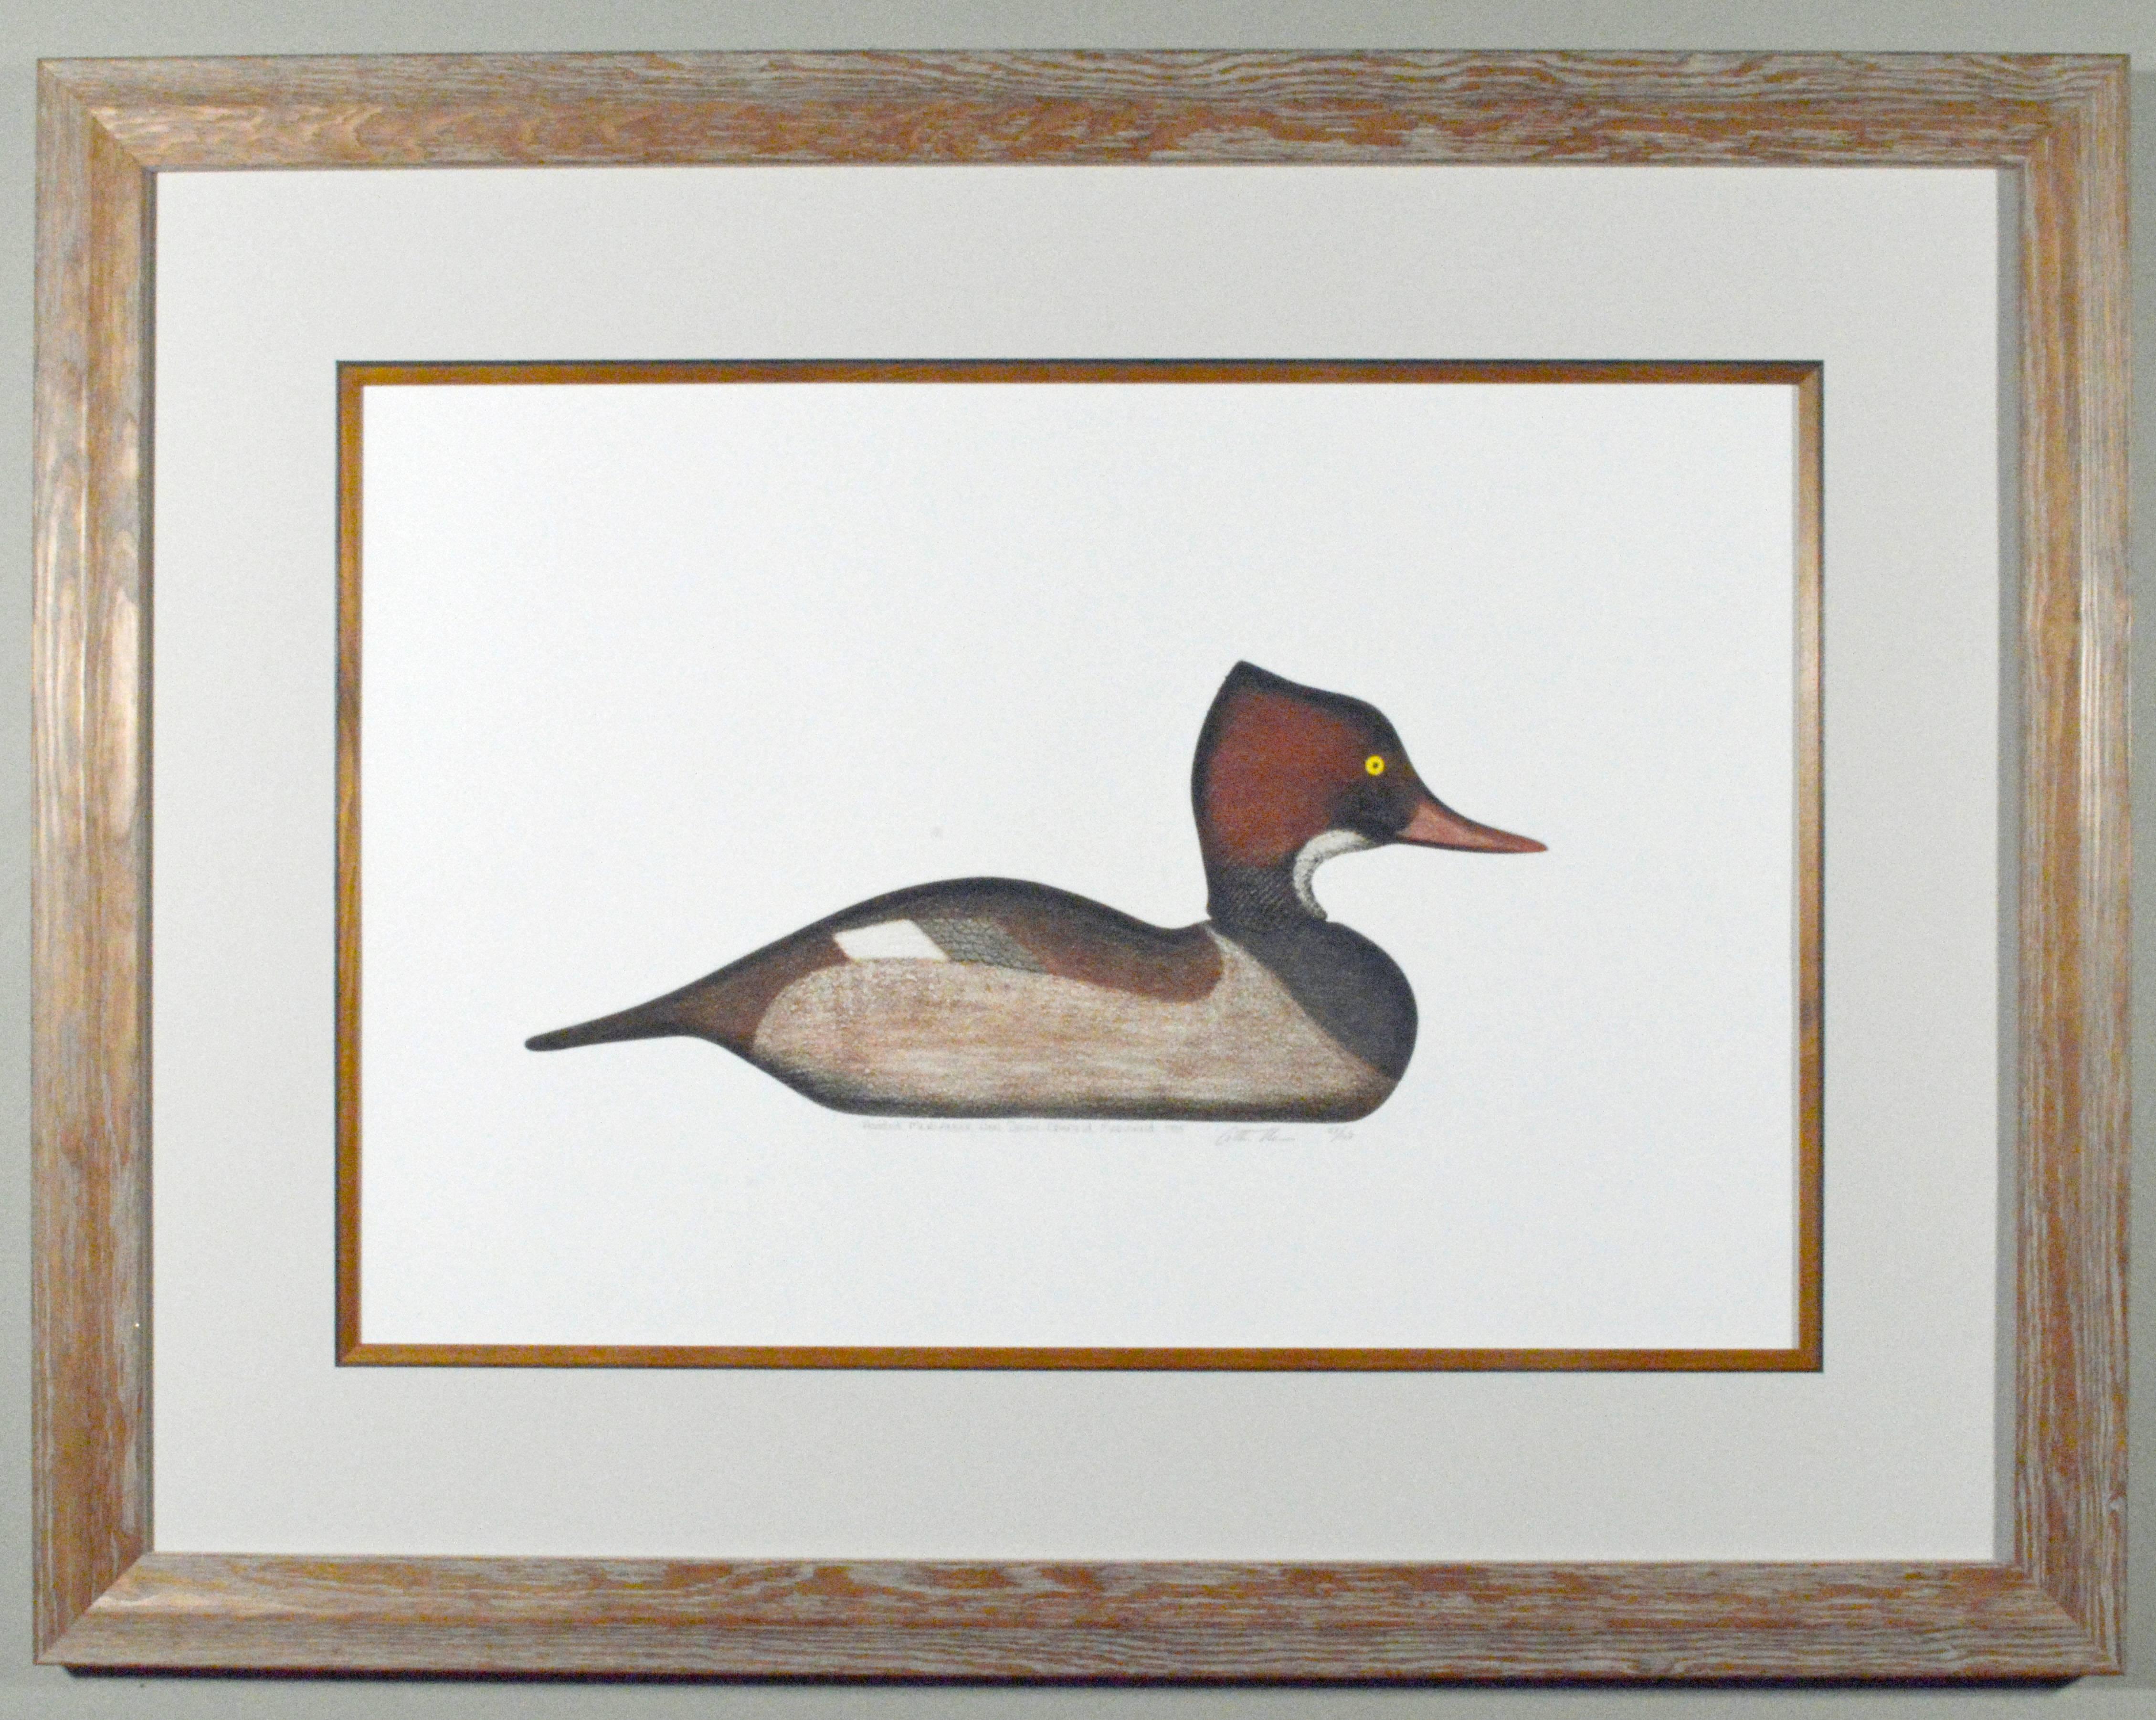 Arthur Nevis stunning large and framed prints depicting a hen & drake hooded merganser decoys from Crisfield, Maryland, 1935.

Both signed and number 23/150.